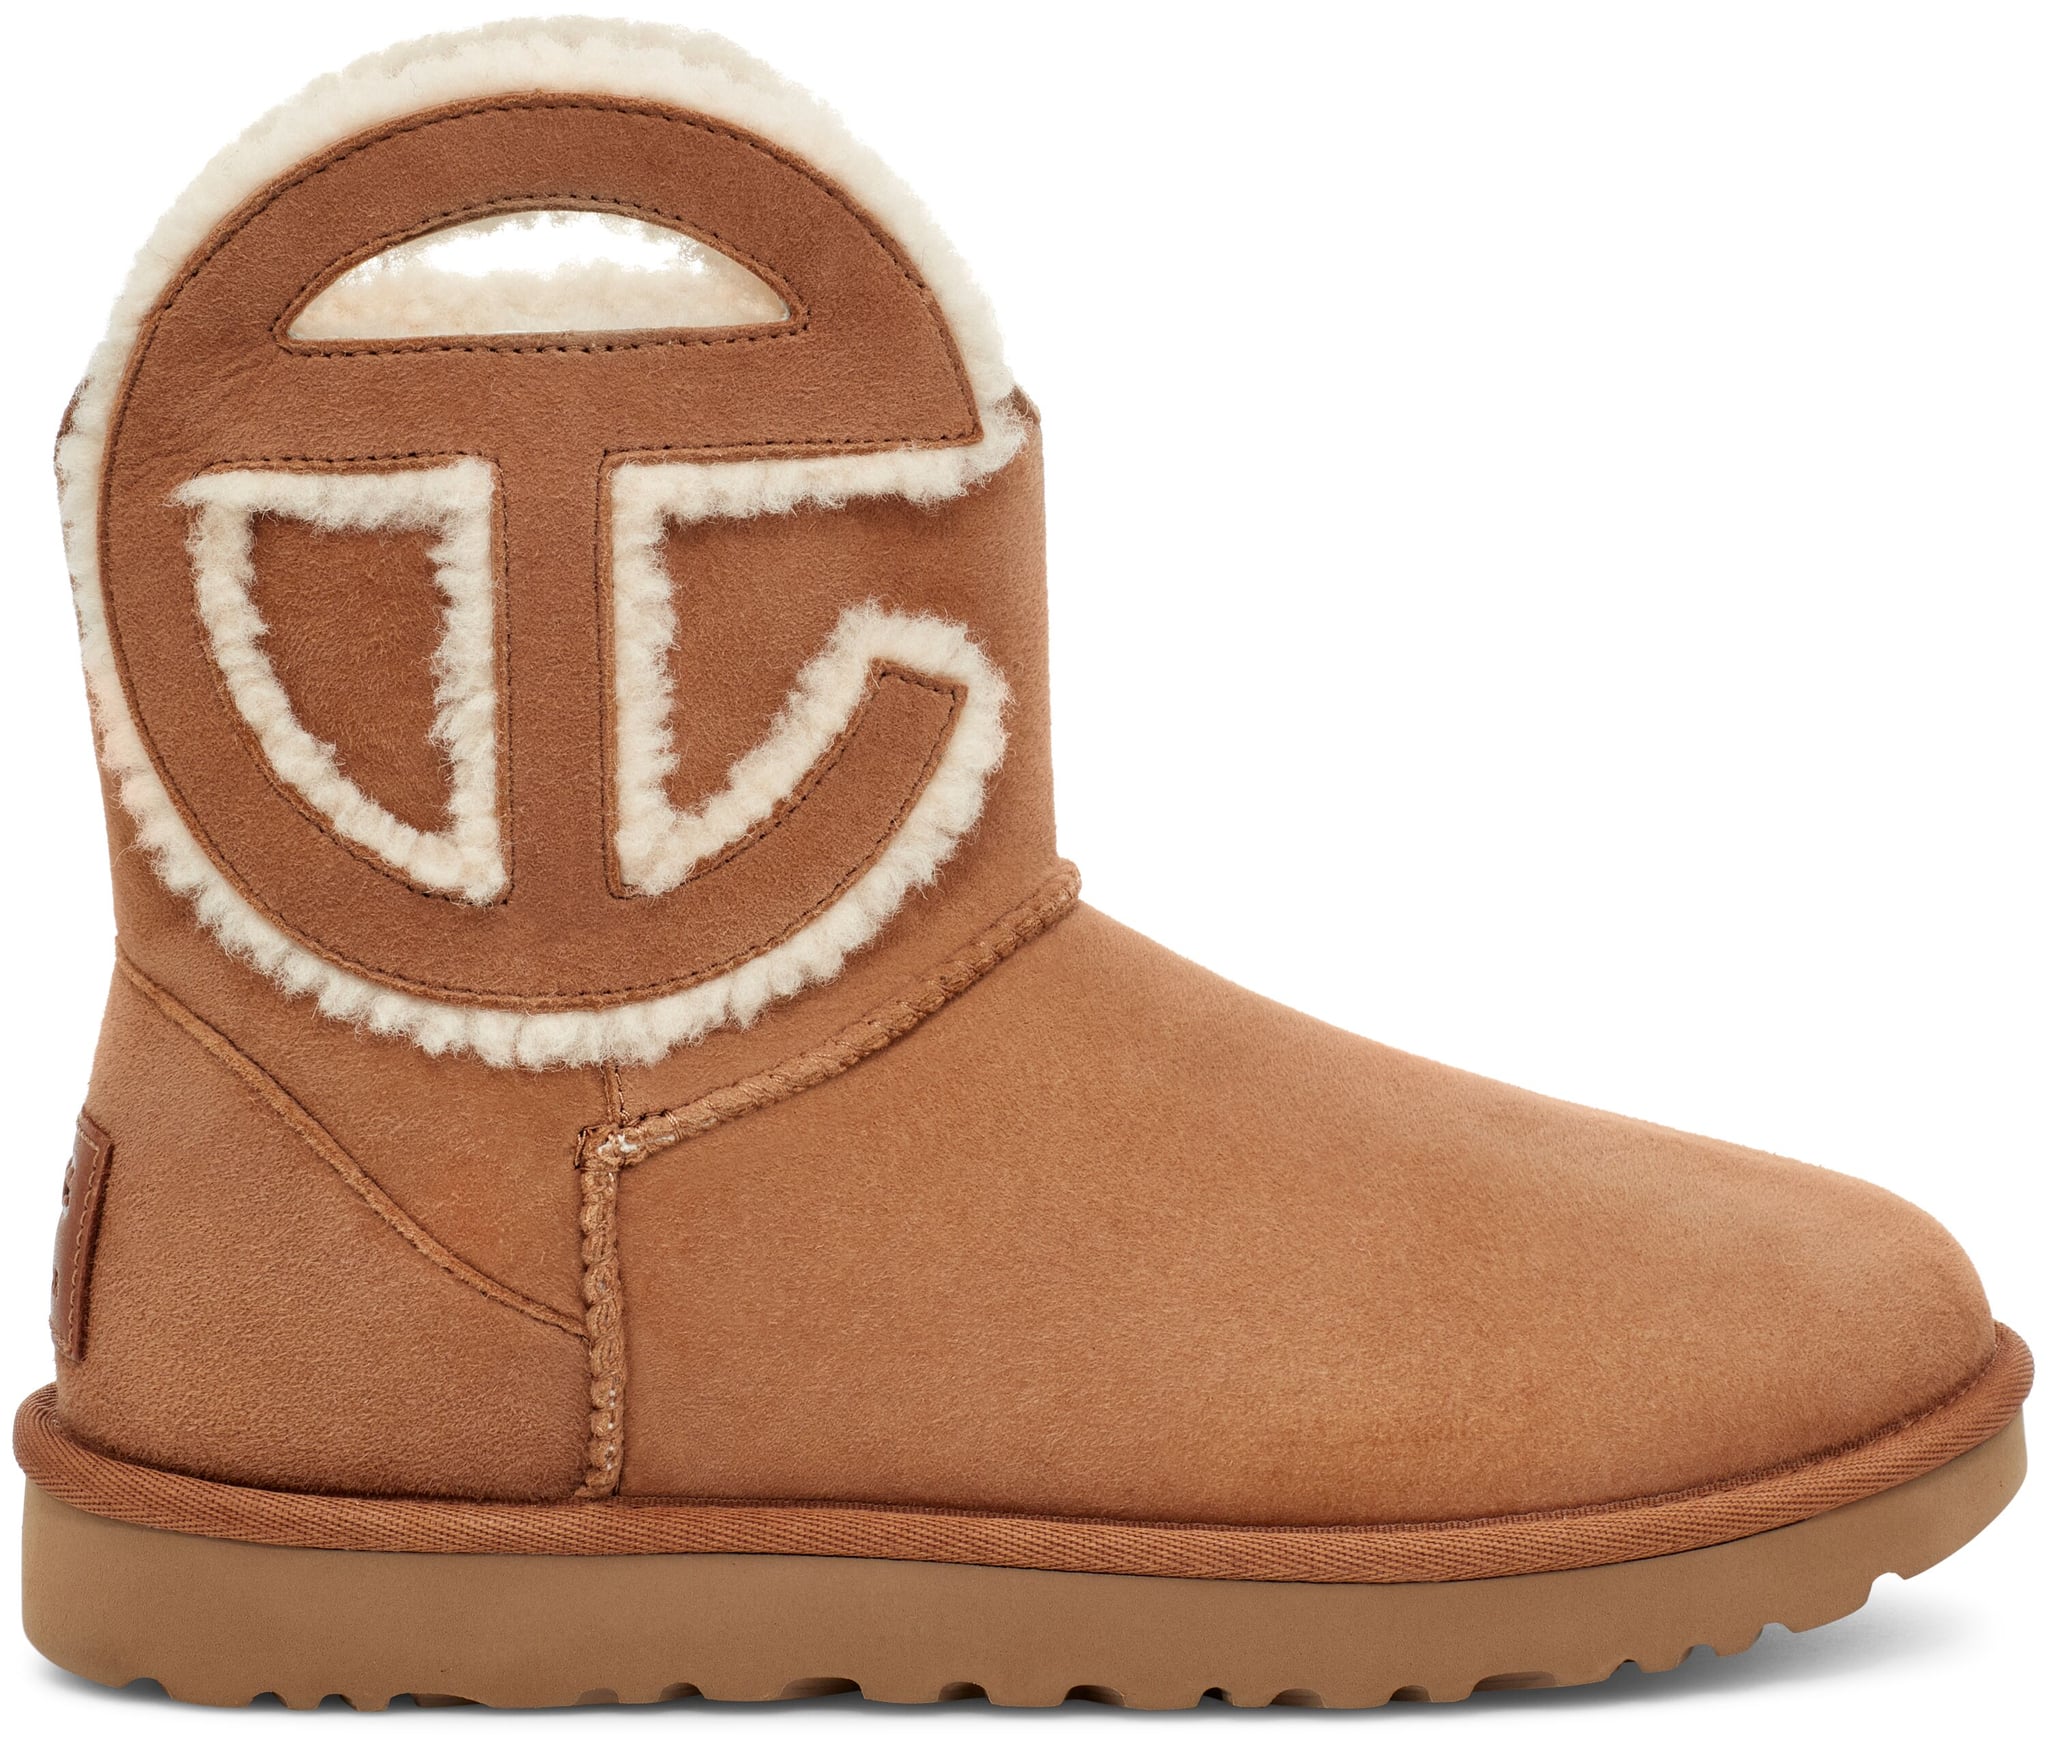 Telfar Teamed Up With UGG For a Collection | POPSUGAR Fashion